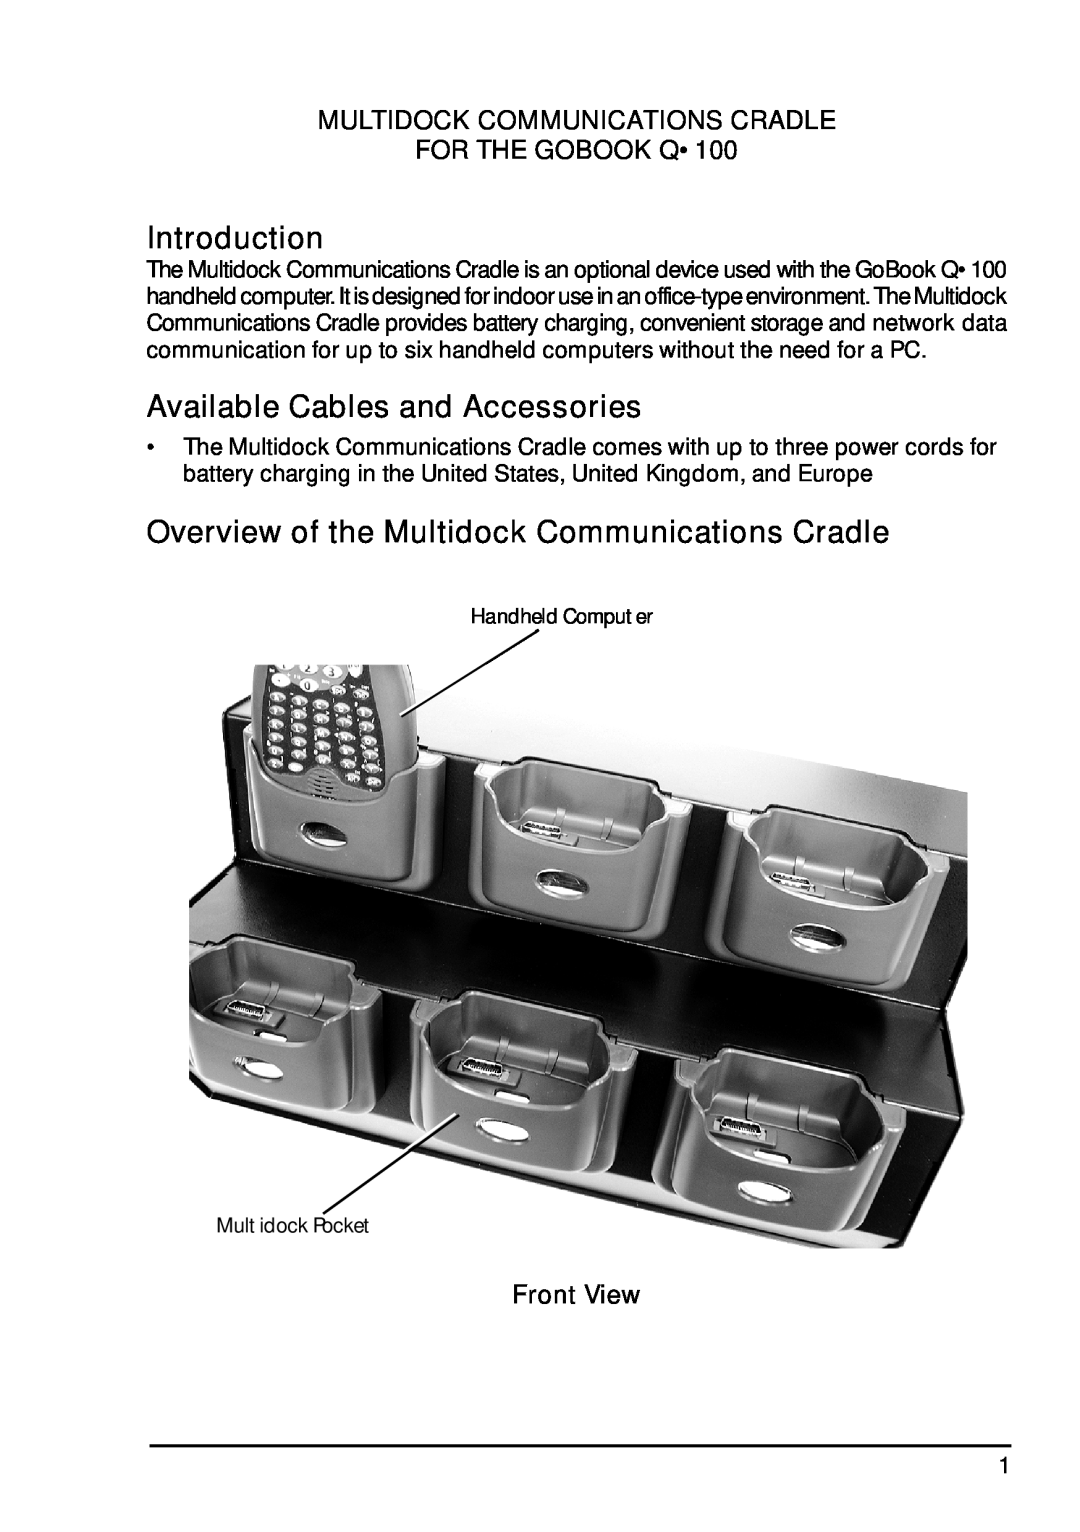 Itron Tech Q100 manual Introduction, Available Cables and Accessories, Overview of the Multidock Communications Cradle 